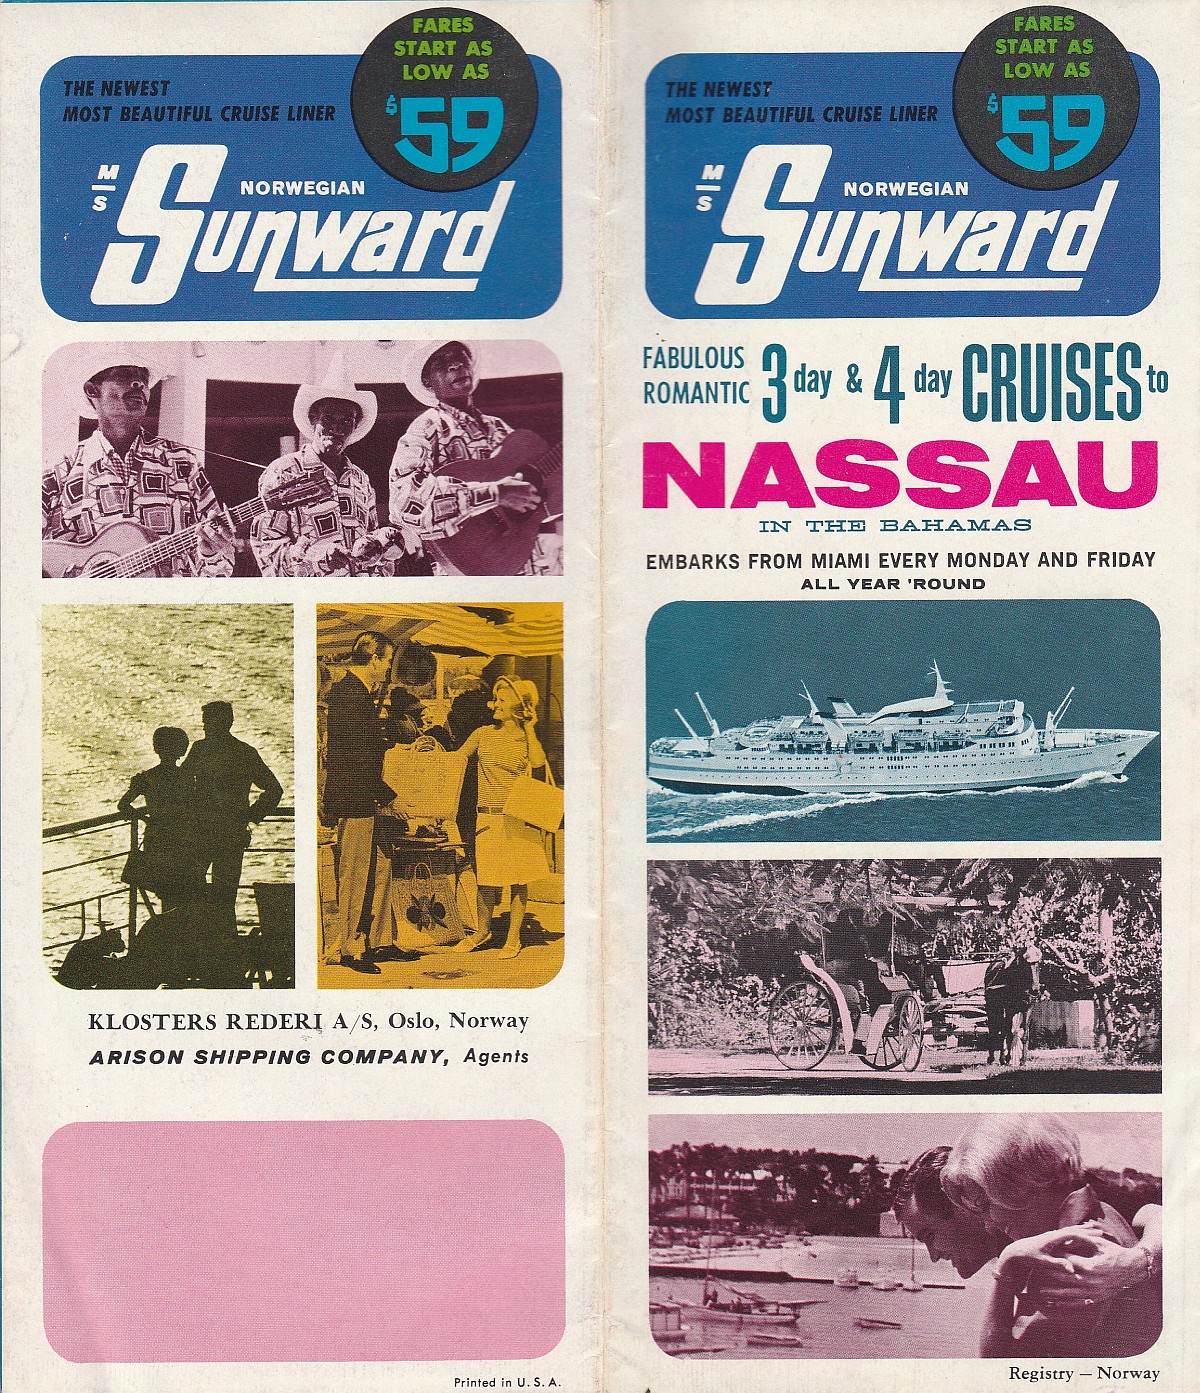 ms Sunward The newest most beautiful cruise liner: Fabulous Romantic 3 day & 4 day cruises to Nassau in the Bahamas